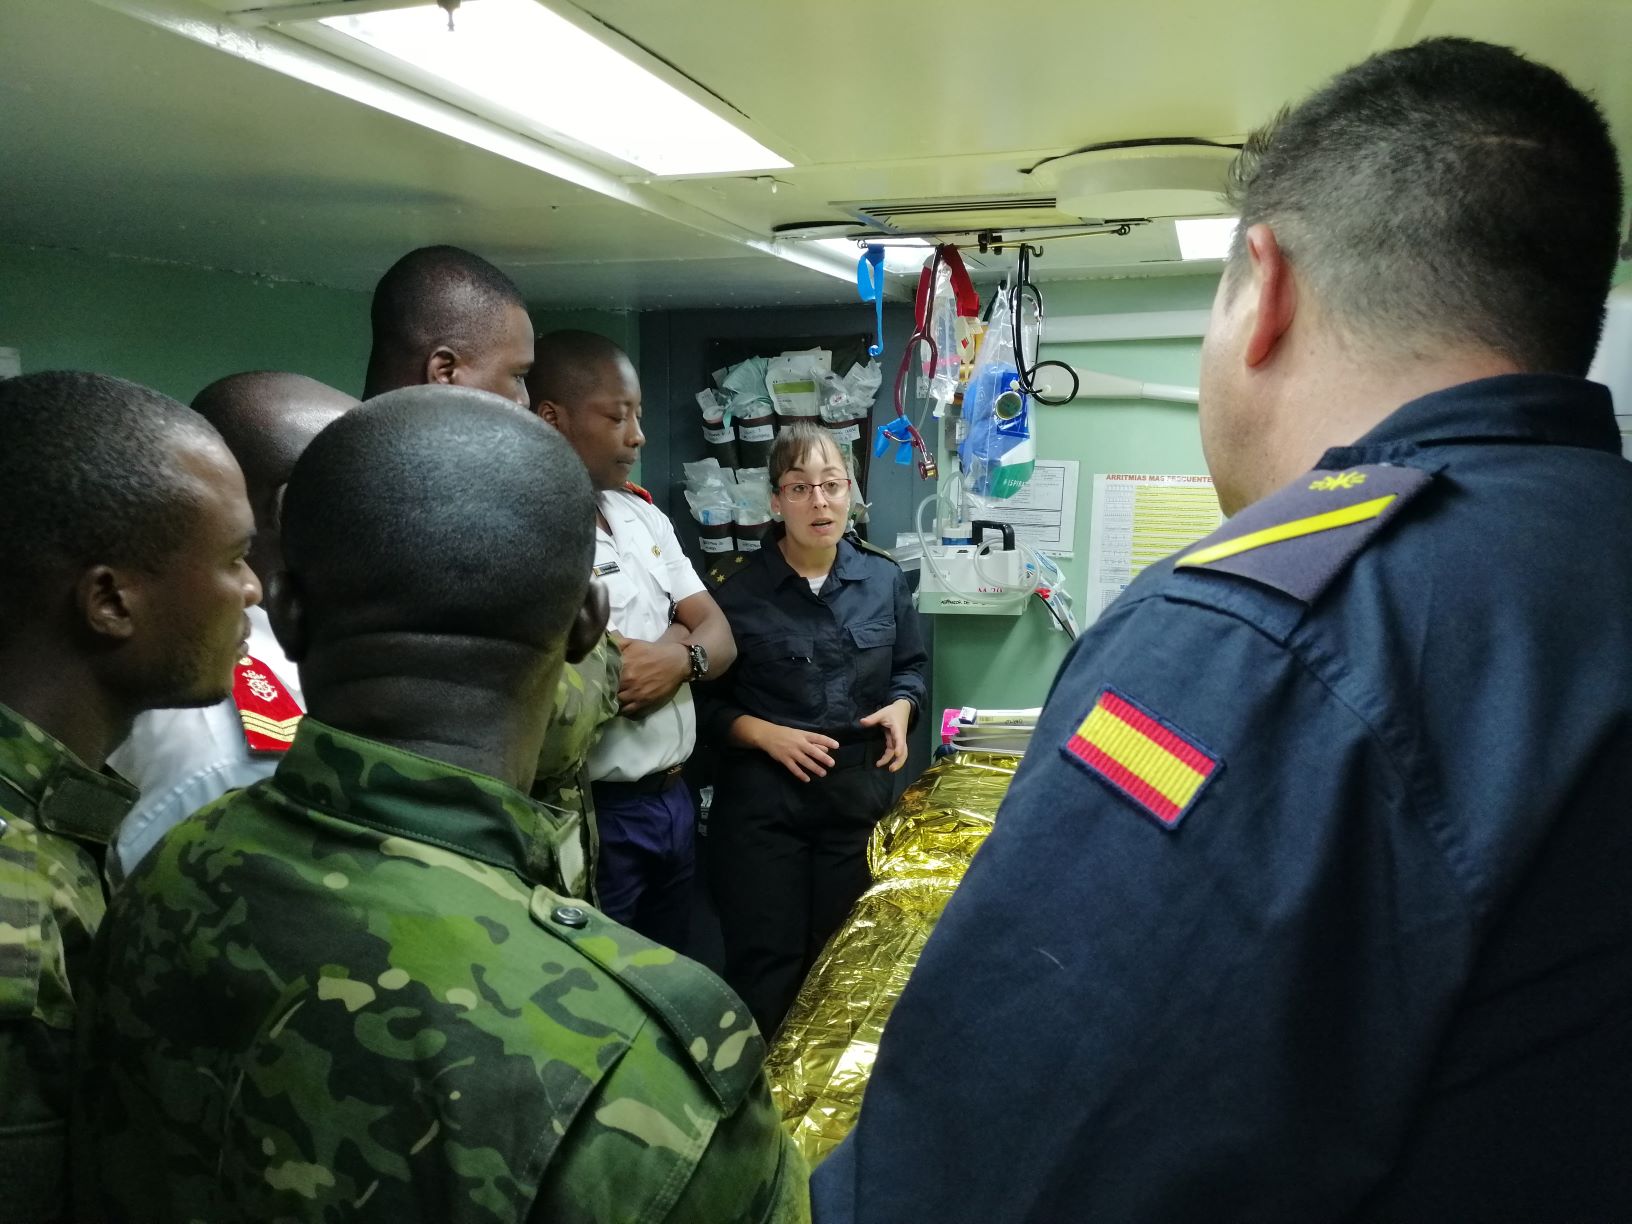 The patrol boat “Atalaya” docks at Abidjan and cooperates with the Ivory Coast Armed Forces